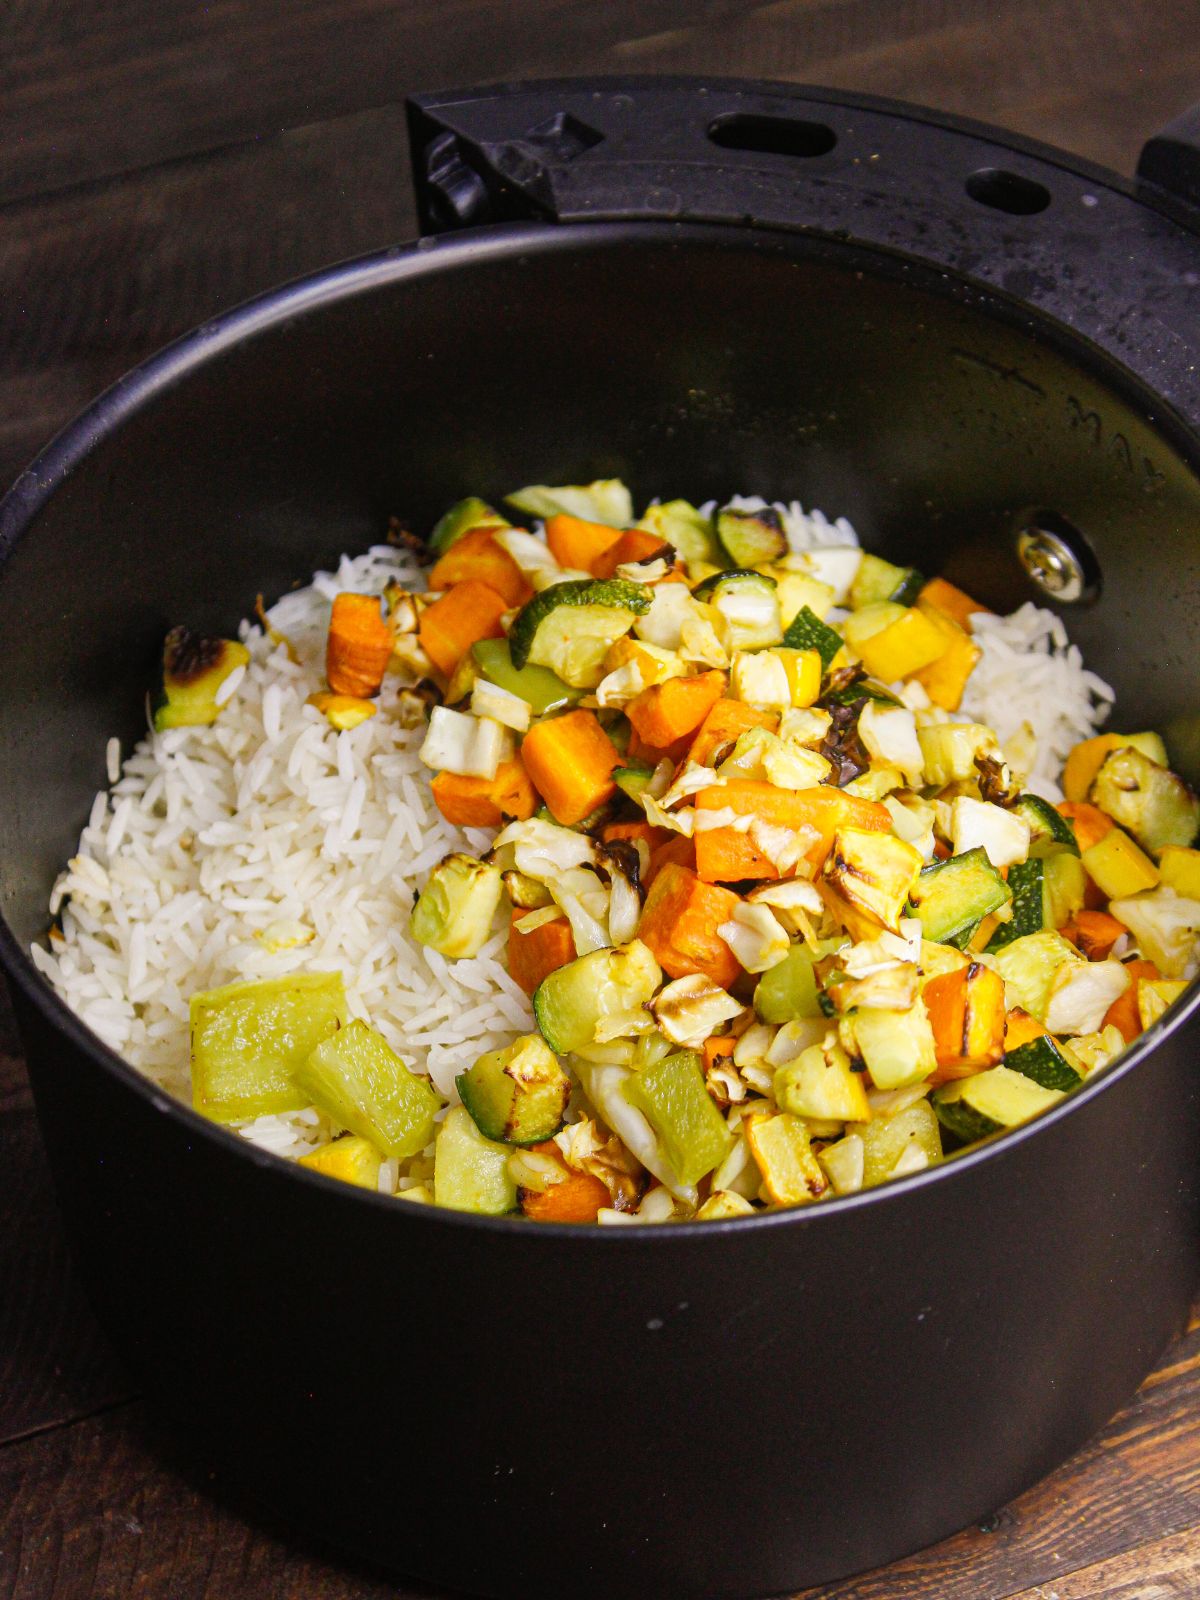 mix vegetables and rice properly 